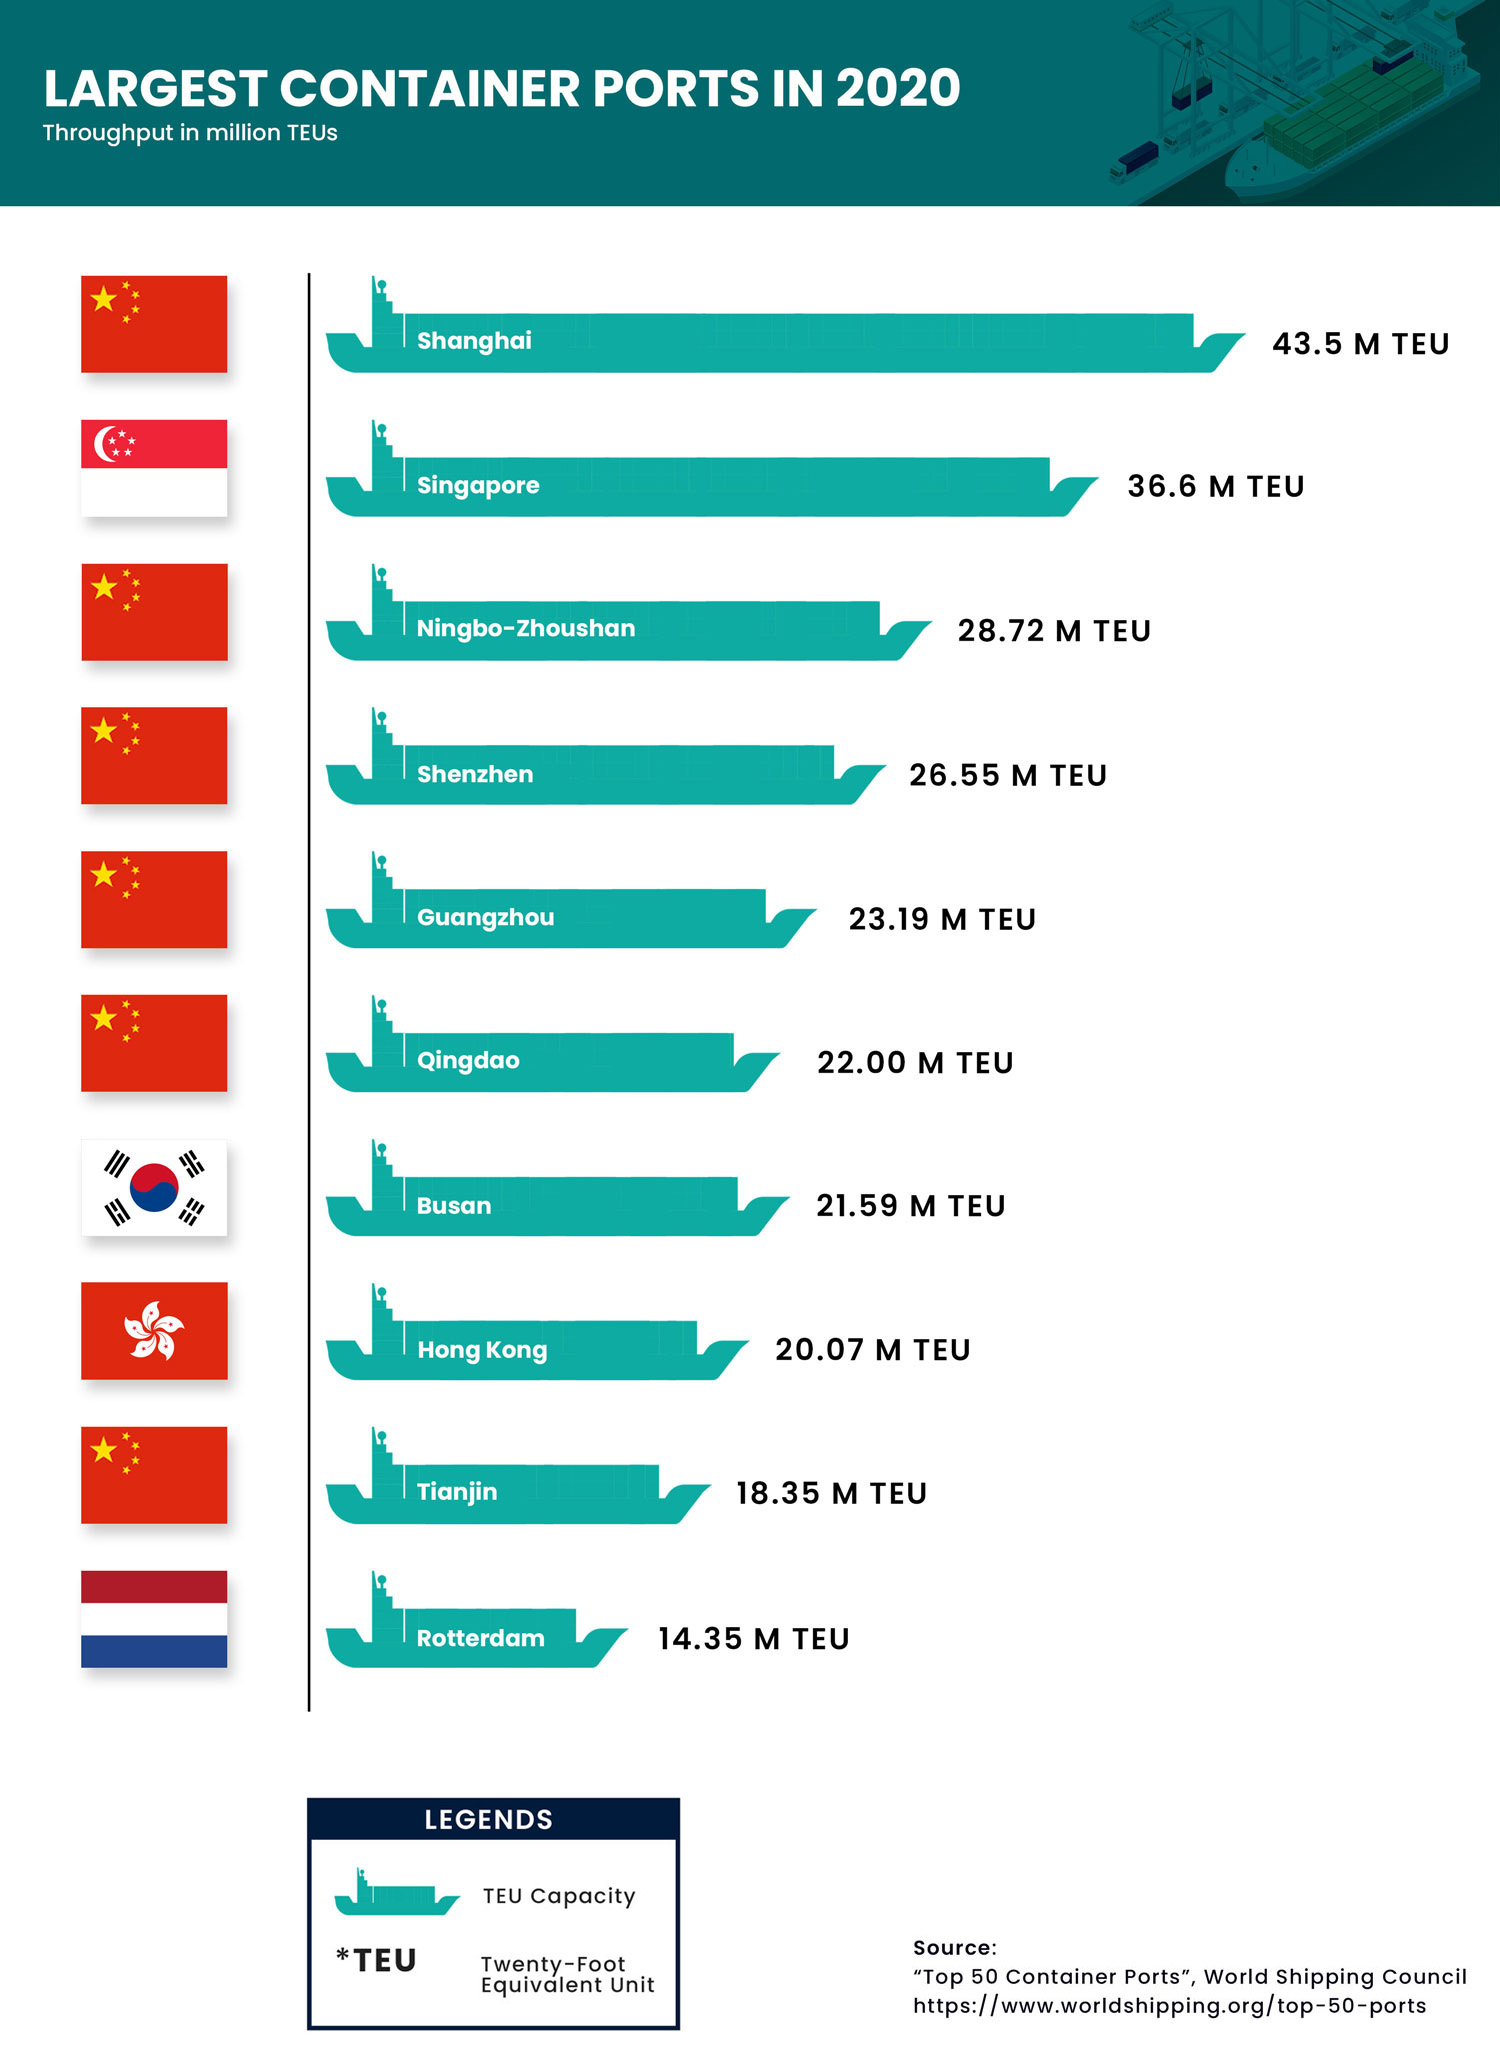 Top 10 World's Largest Container Ports in 2020